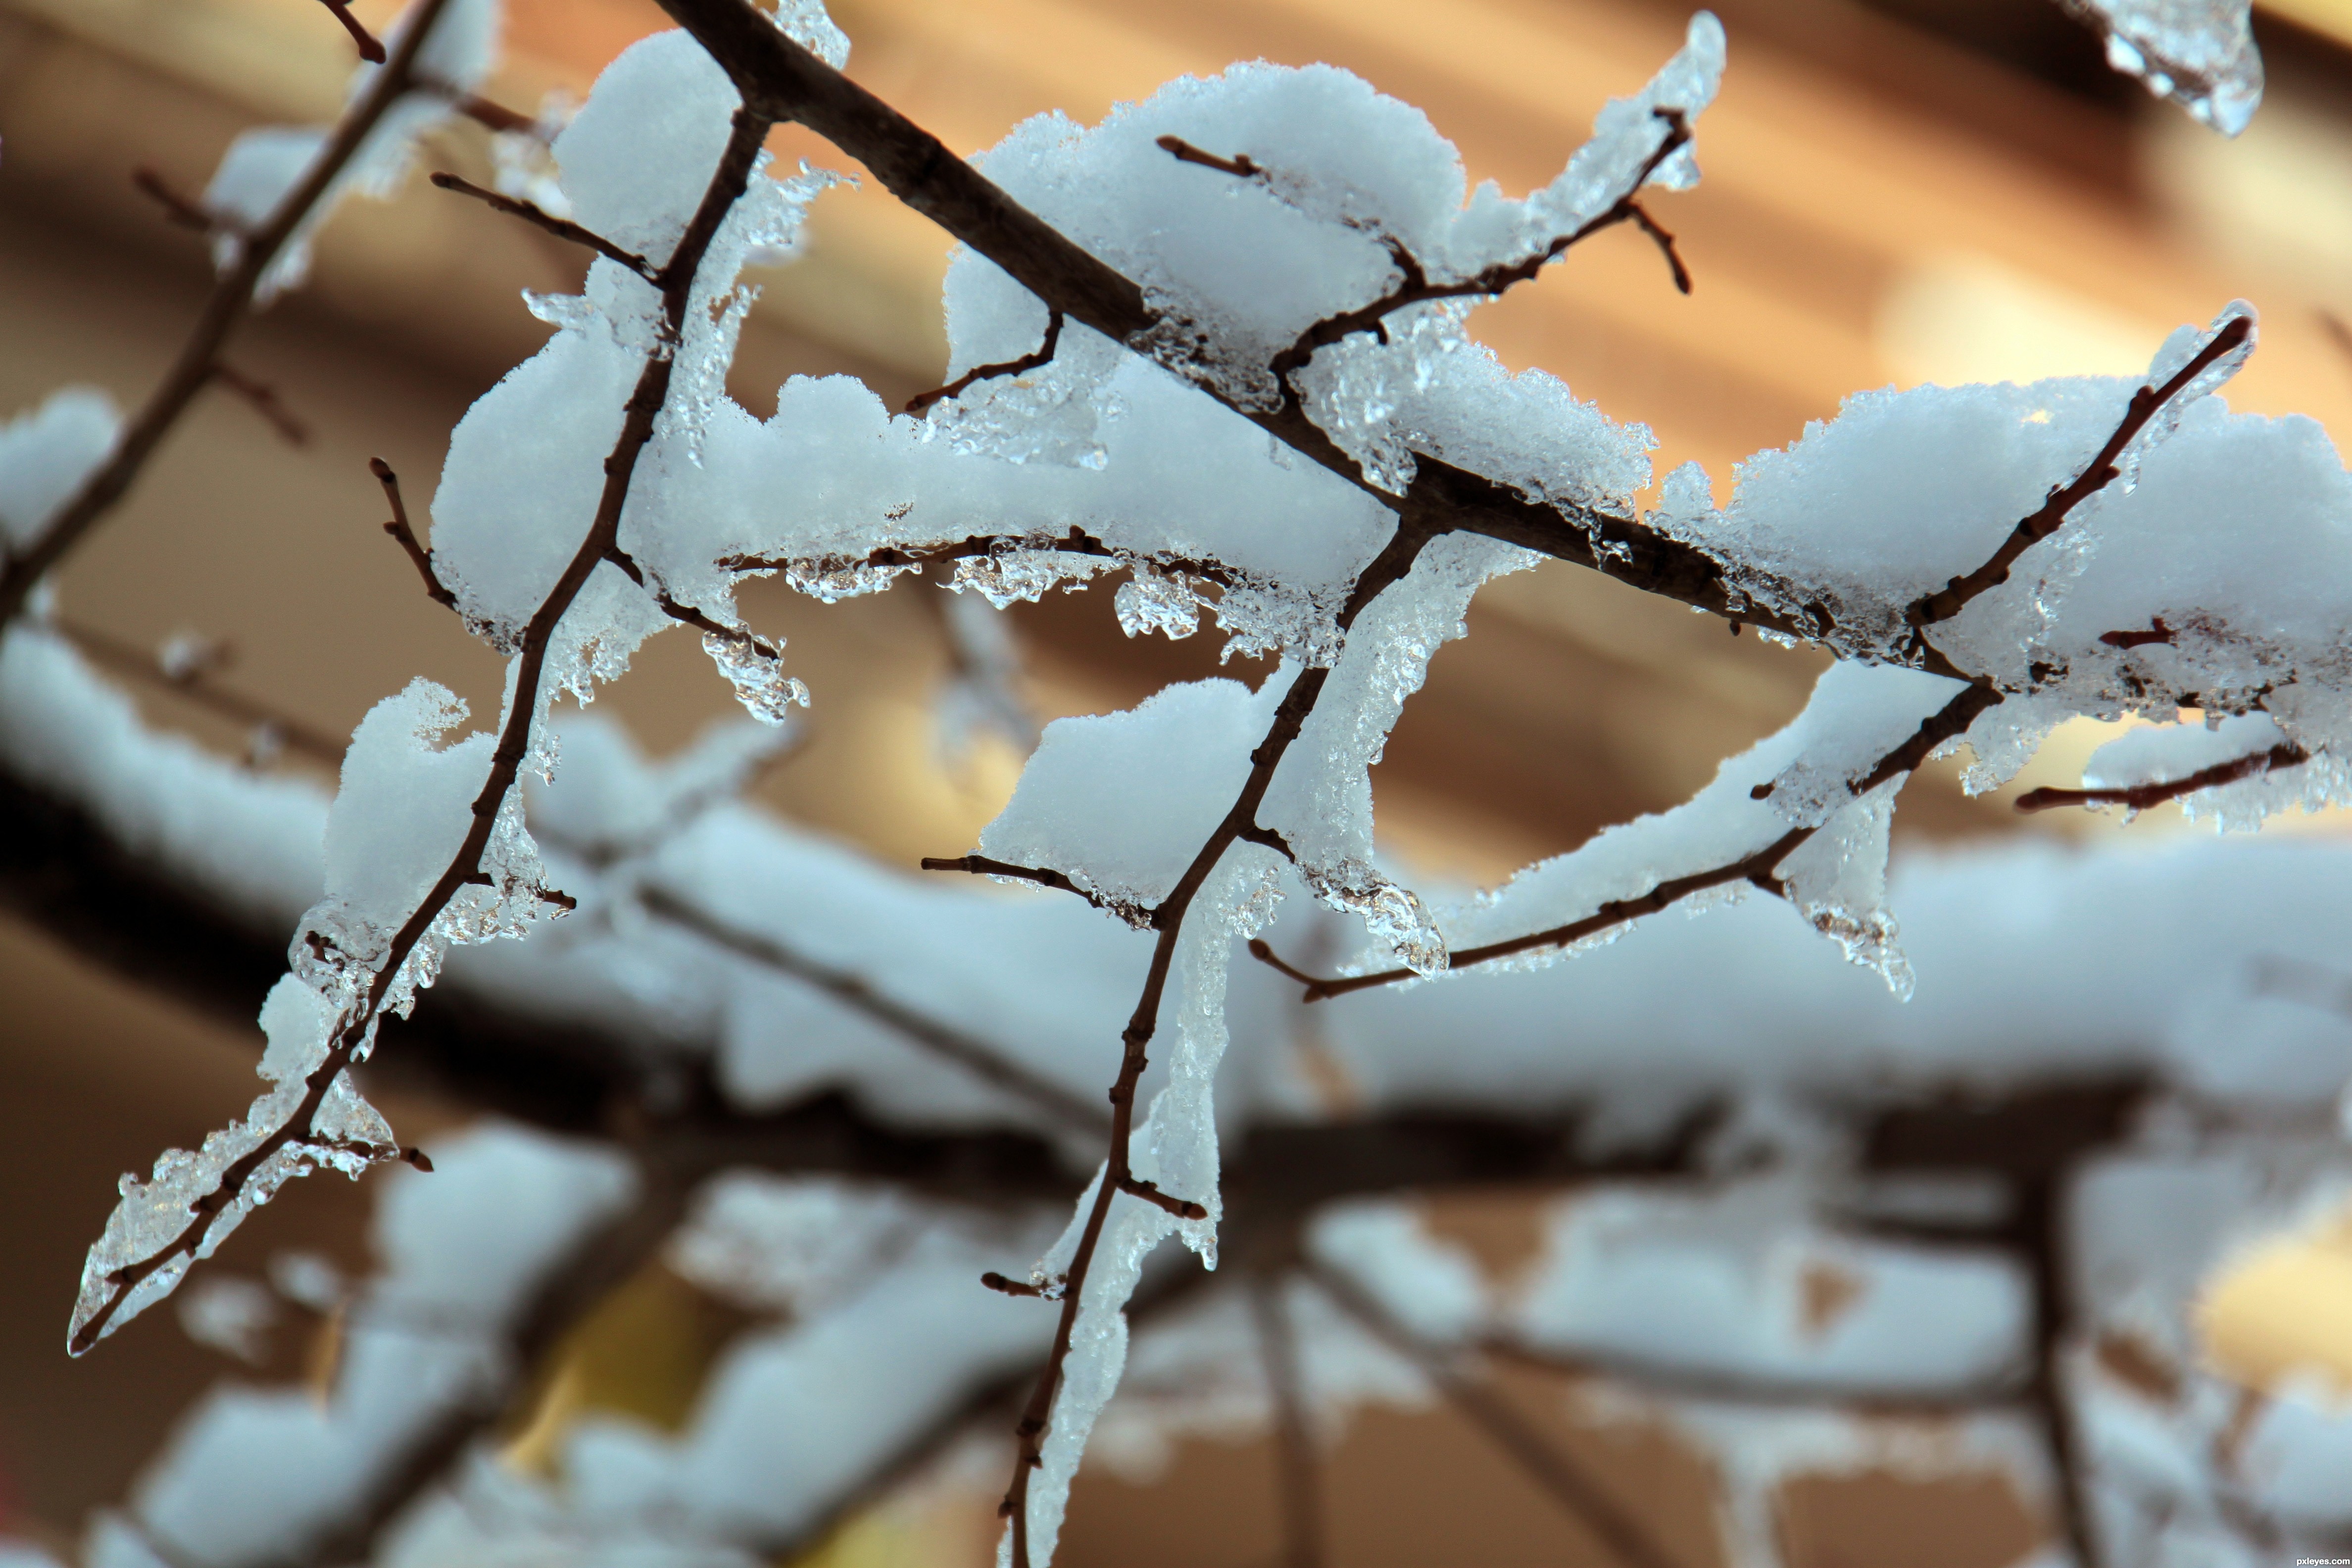 Frozen branches picture, by patty for: ice 2 photography contest ...